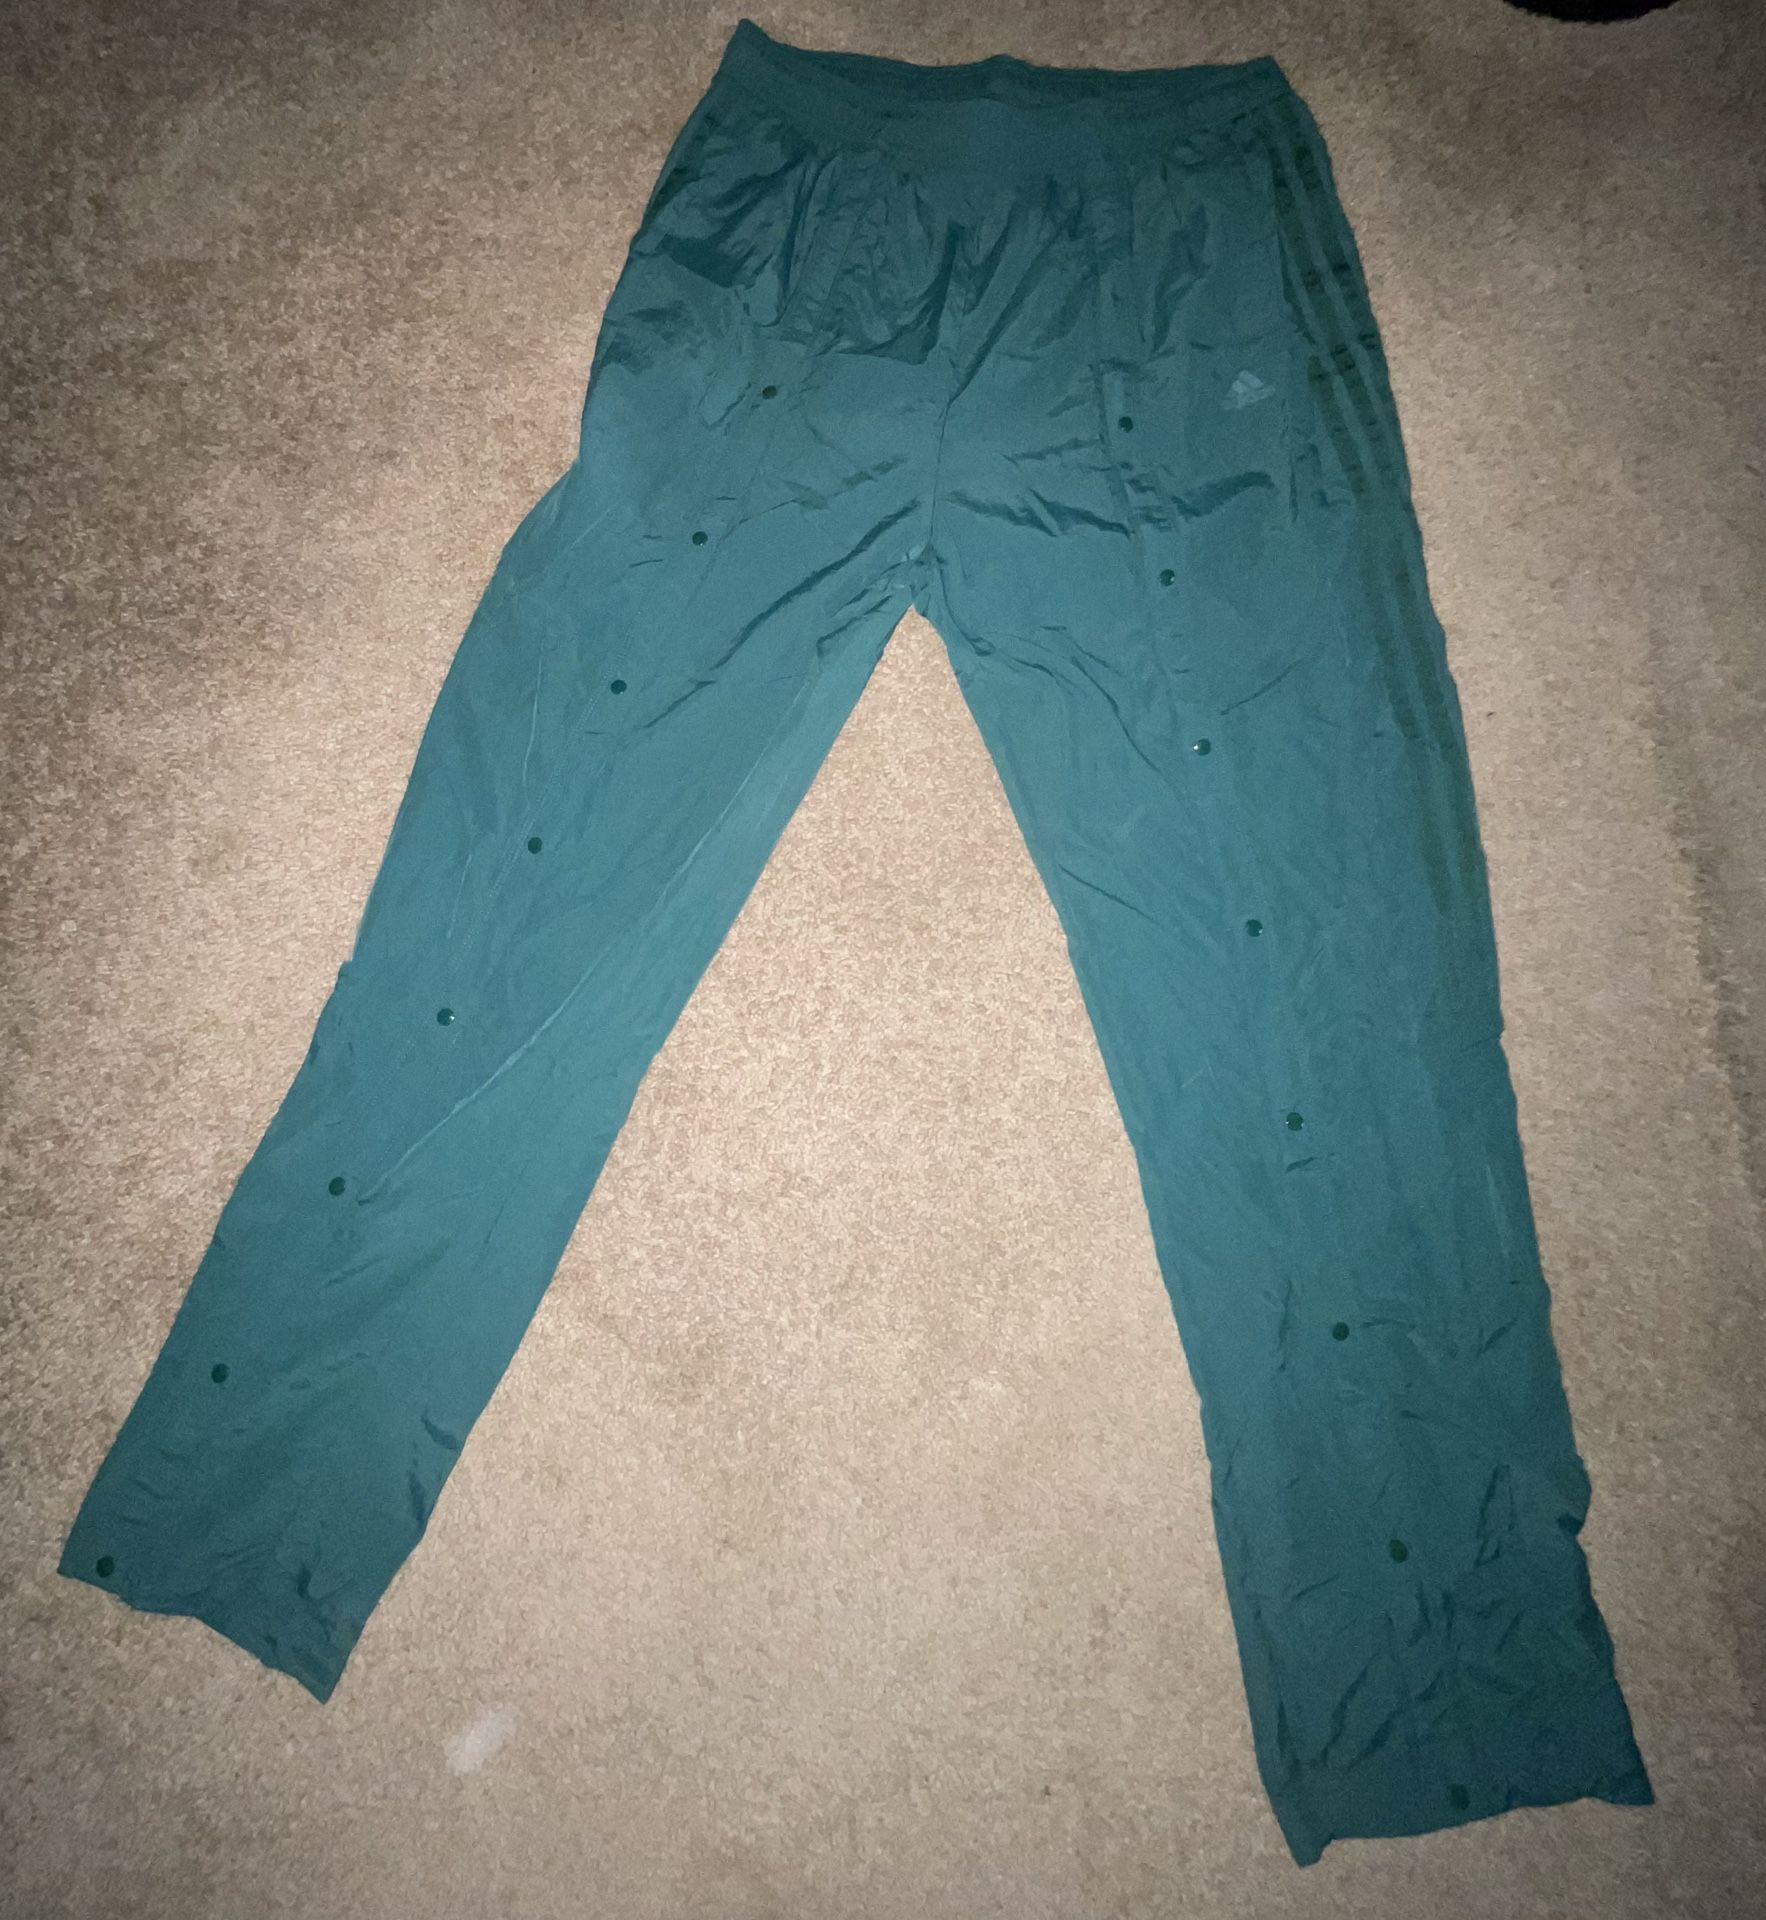 Adidas button down track pants